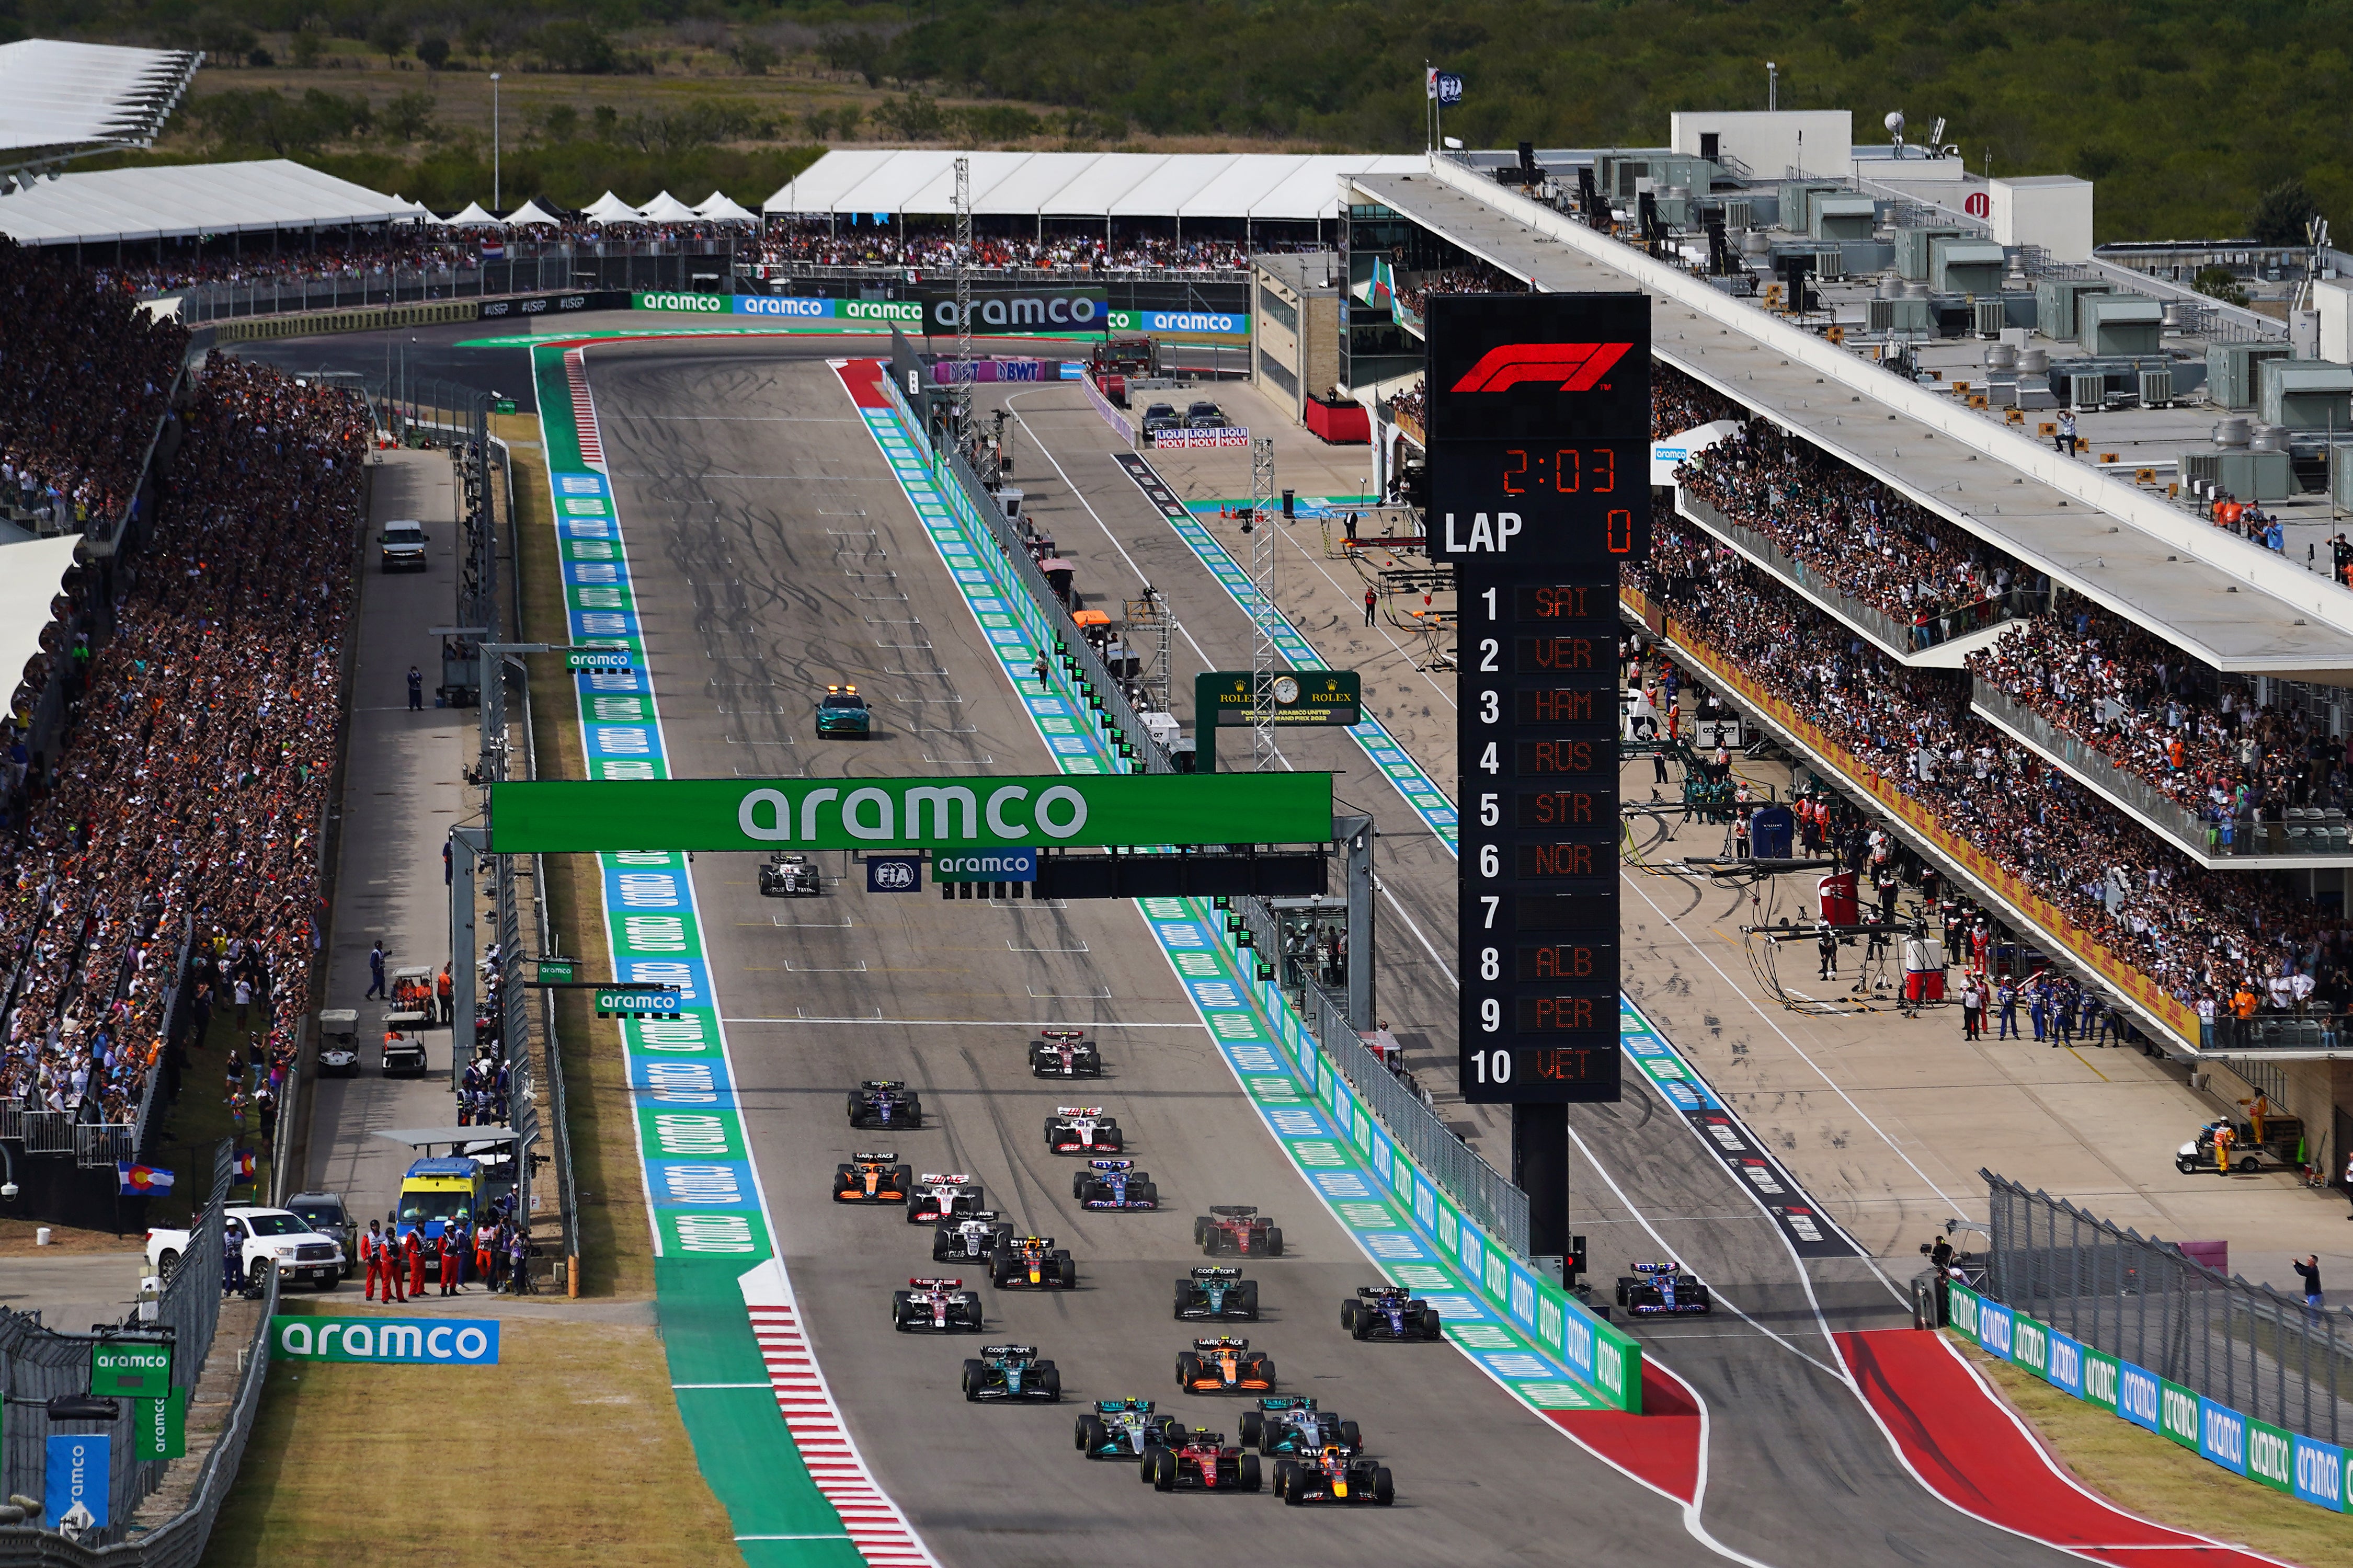 The Circuit of the Americas in Austin usually produces an intriguing race